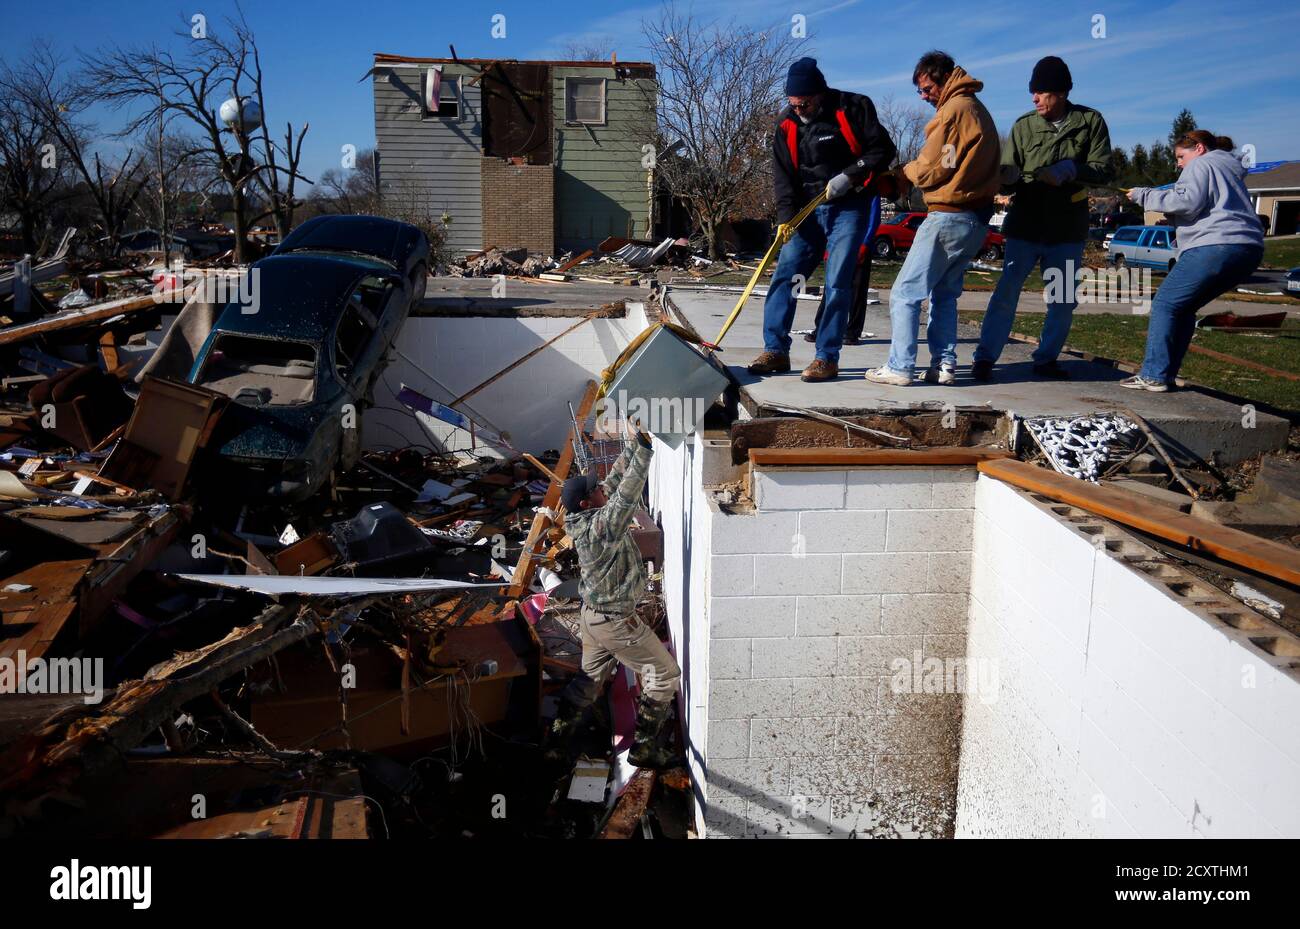 blake-martin-l-pushes-a-safe-out-of-his-neighbors-basement-as-other-neighbors-pull-from-above-in-washington-illinois-november-19-2013-rescue-workers-in-a-small-illinois-city-raked-by-a-powerful-tornado-were-combing-through-the-wreckage-on-tuesday-in-the-wake-of-a-fast-moving-storm-that-killed-eight-people-in-two-states-and-may-have-caused-1-billion-62104086449-in-property-damage-reutersjeff-haynes-united-states-tags-disaster-environment-2CXTHM1.jpg